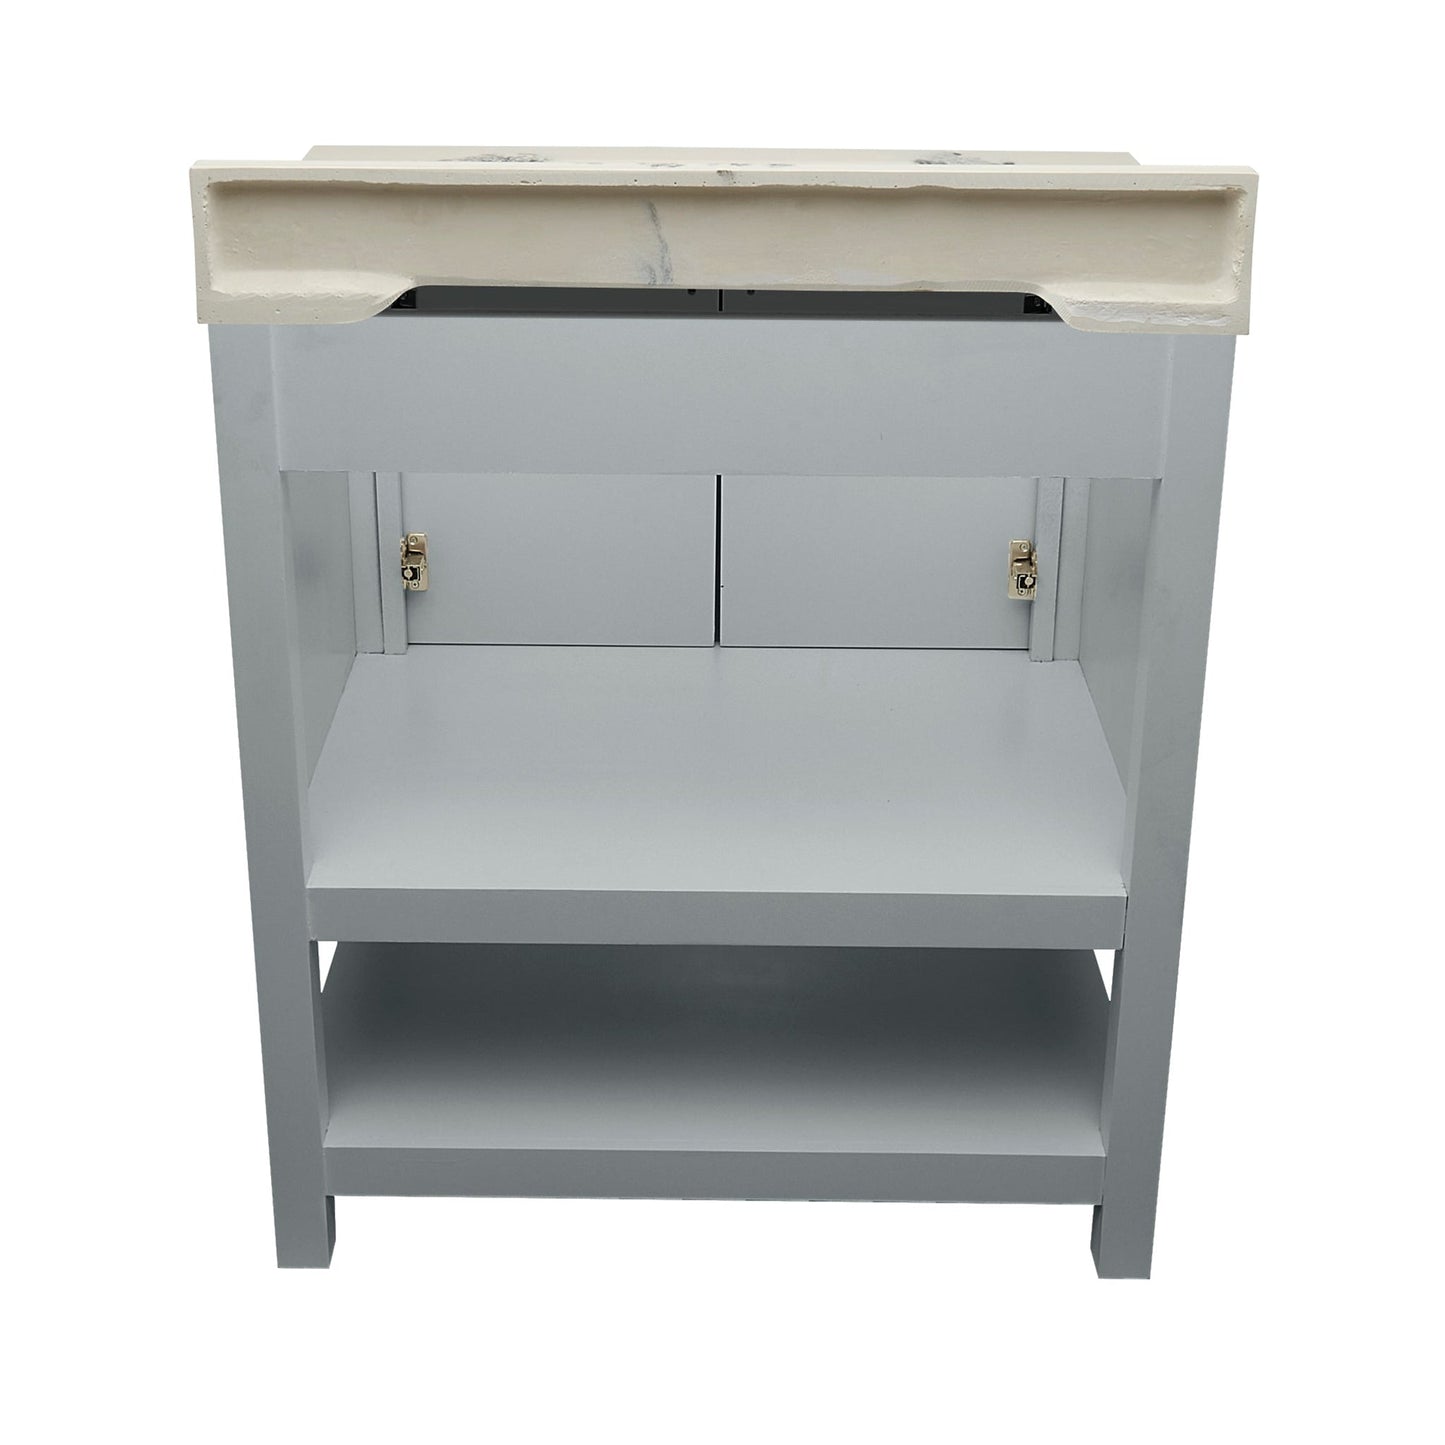 Ella's Bubbles Taos 31" Gray Bathroom Vanity With Carrara White Cultured Marble Top With Backsplash and Sink